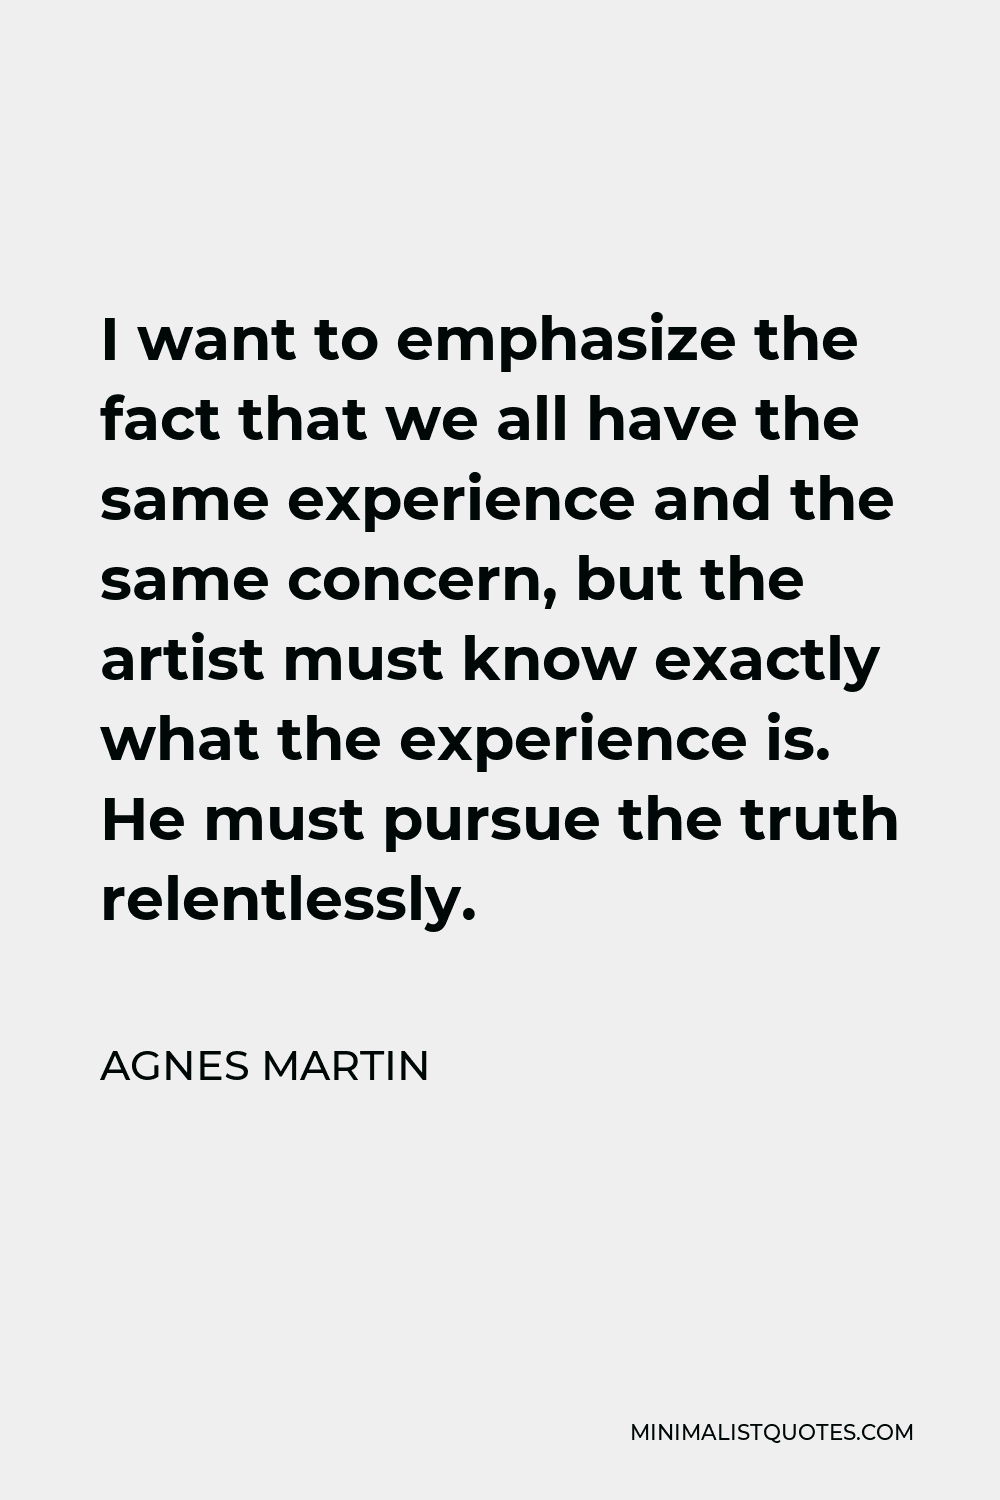 Agnes Martin Quote - I want to emphasize the fact that we all have the same experience and the same concern, but the artist must know exactly what the experience is. He must pursue the truth relentlessly.